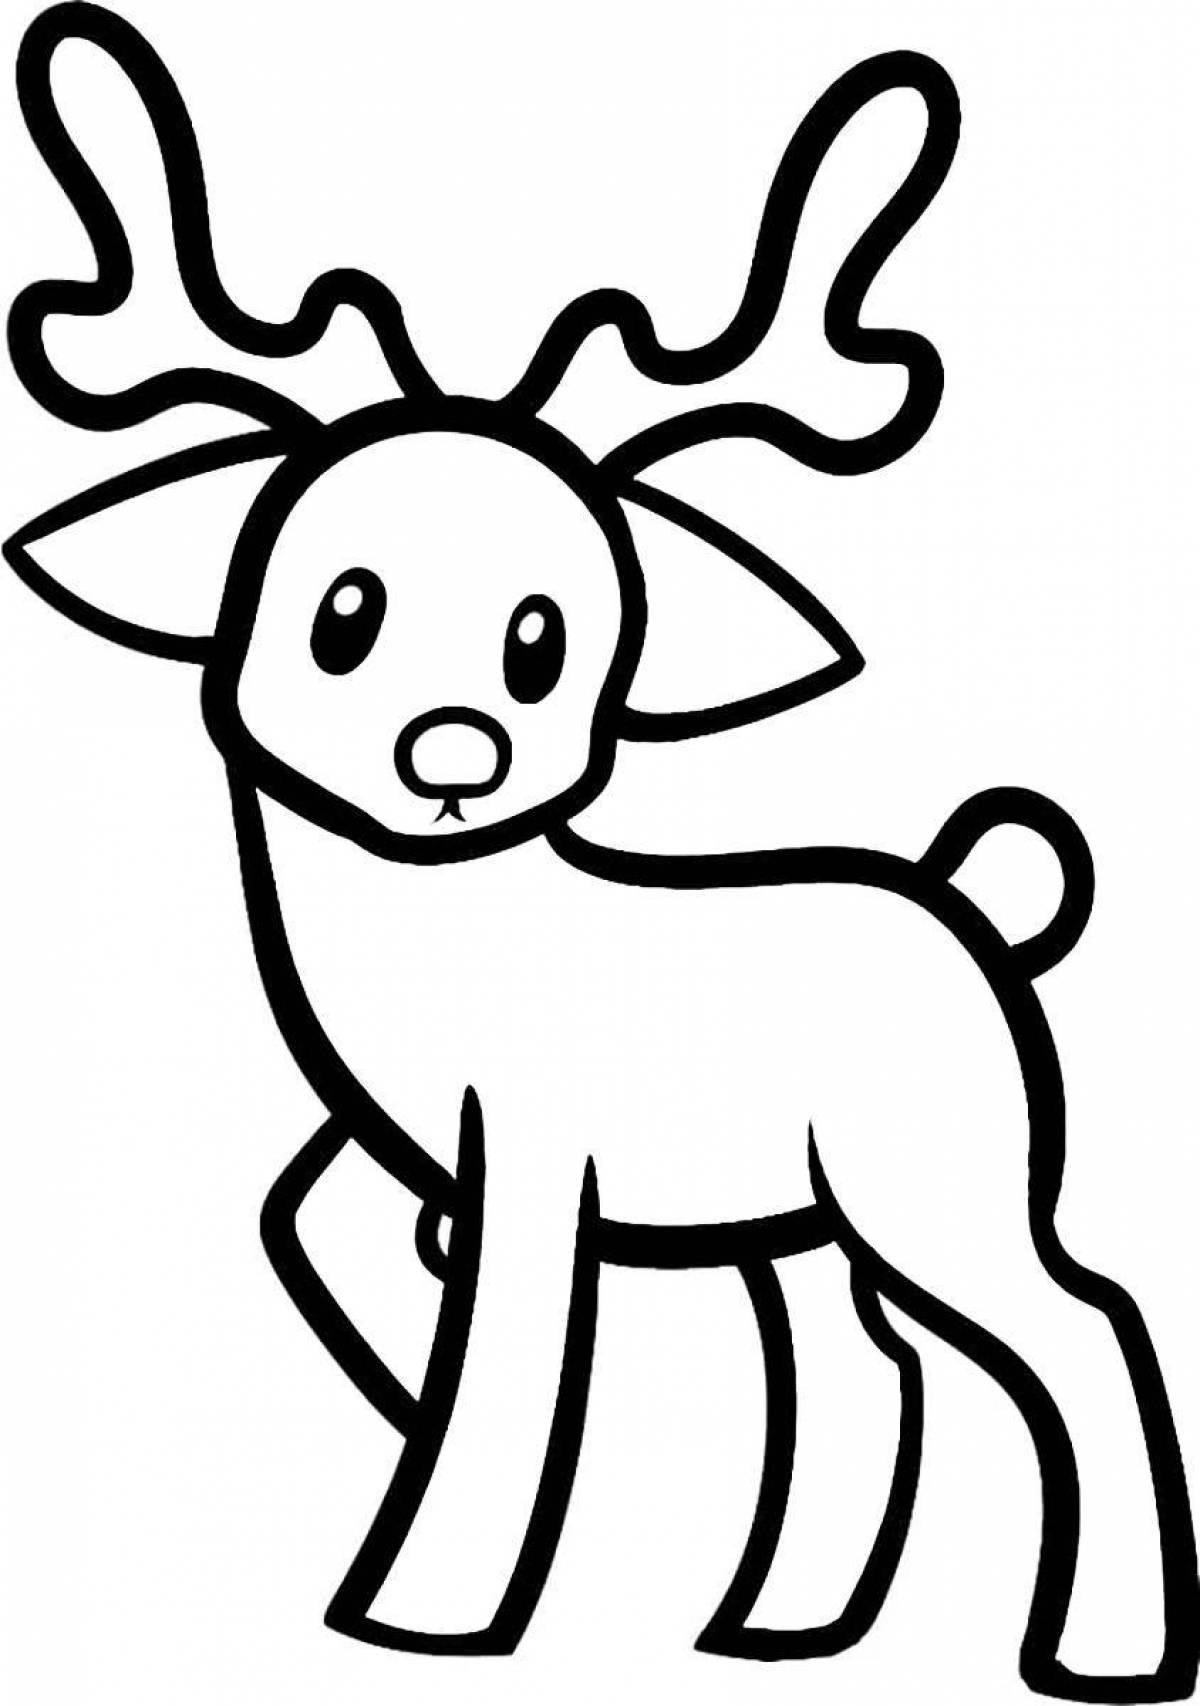 Christmas deer coloring pages for kids